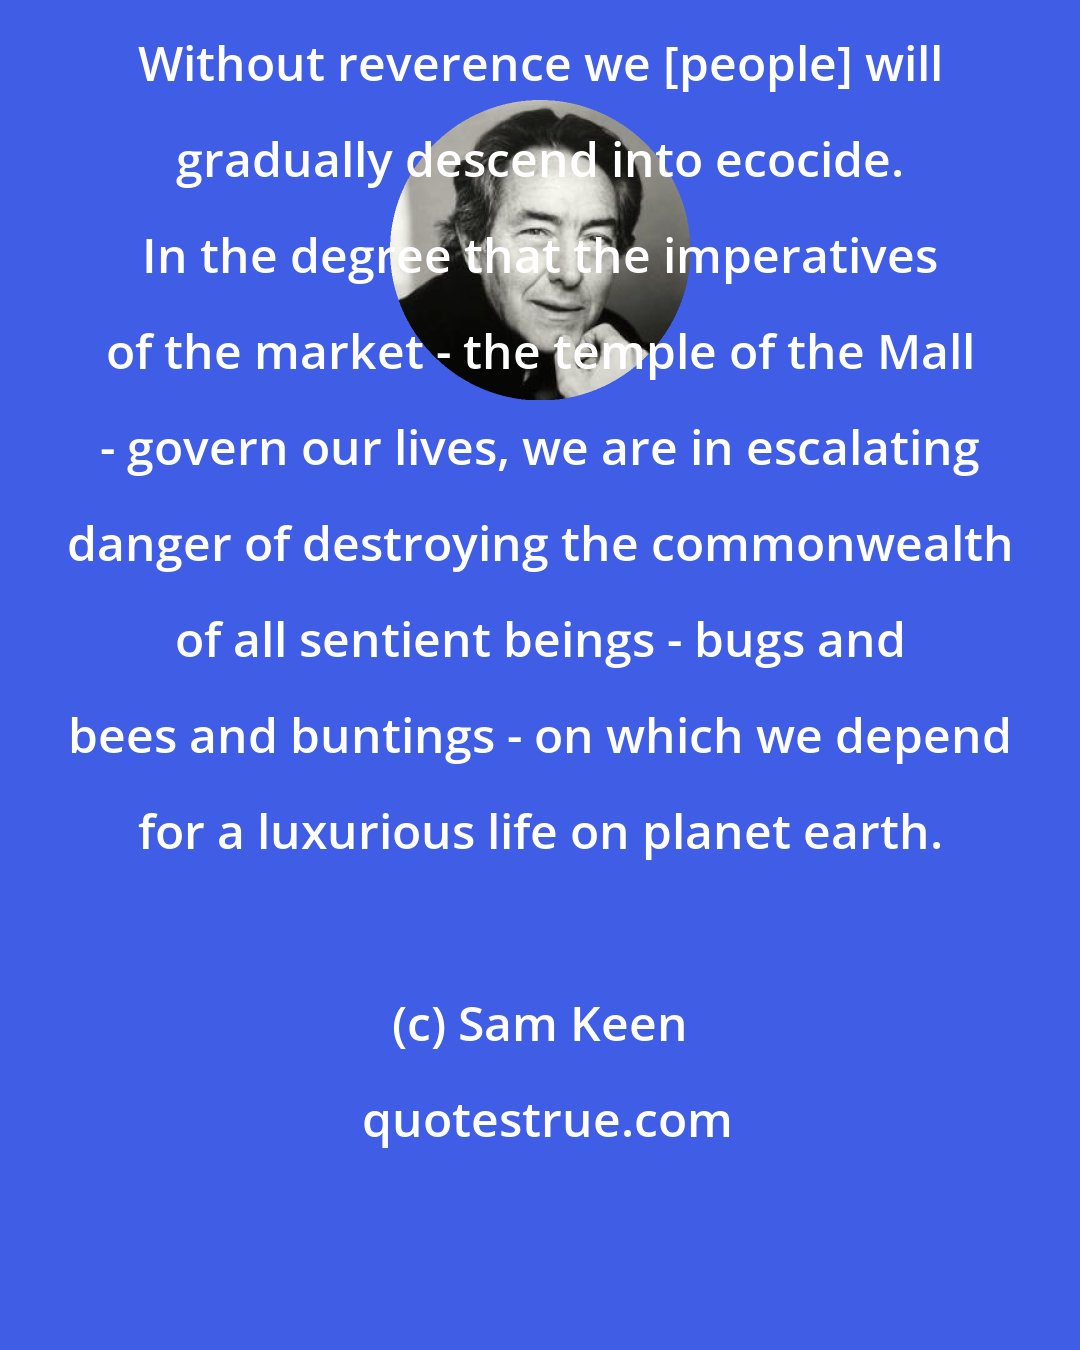 Sam Keen: Without reverence we [people] will gradually descend into ecocide. In the degree that the imperatives of the market - the temple of the Mall - govern our lives, we are in escalating danger of destroying the commonwealth of all sentient beings - bugs and bees and buntings - on which we depend for a luxurious life on planet earth.